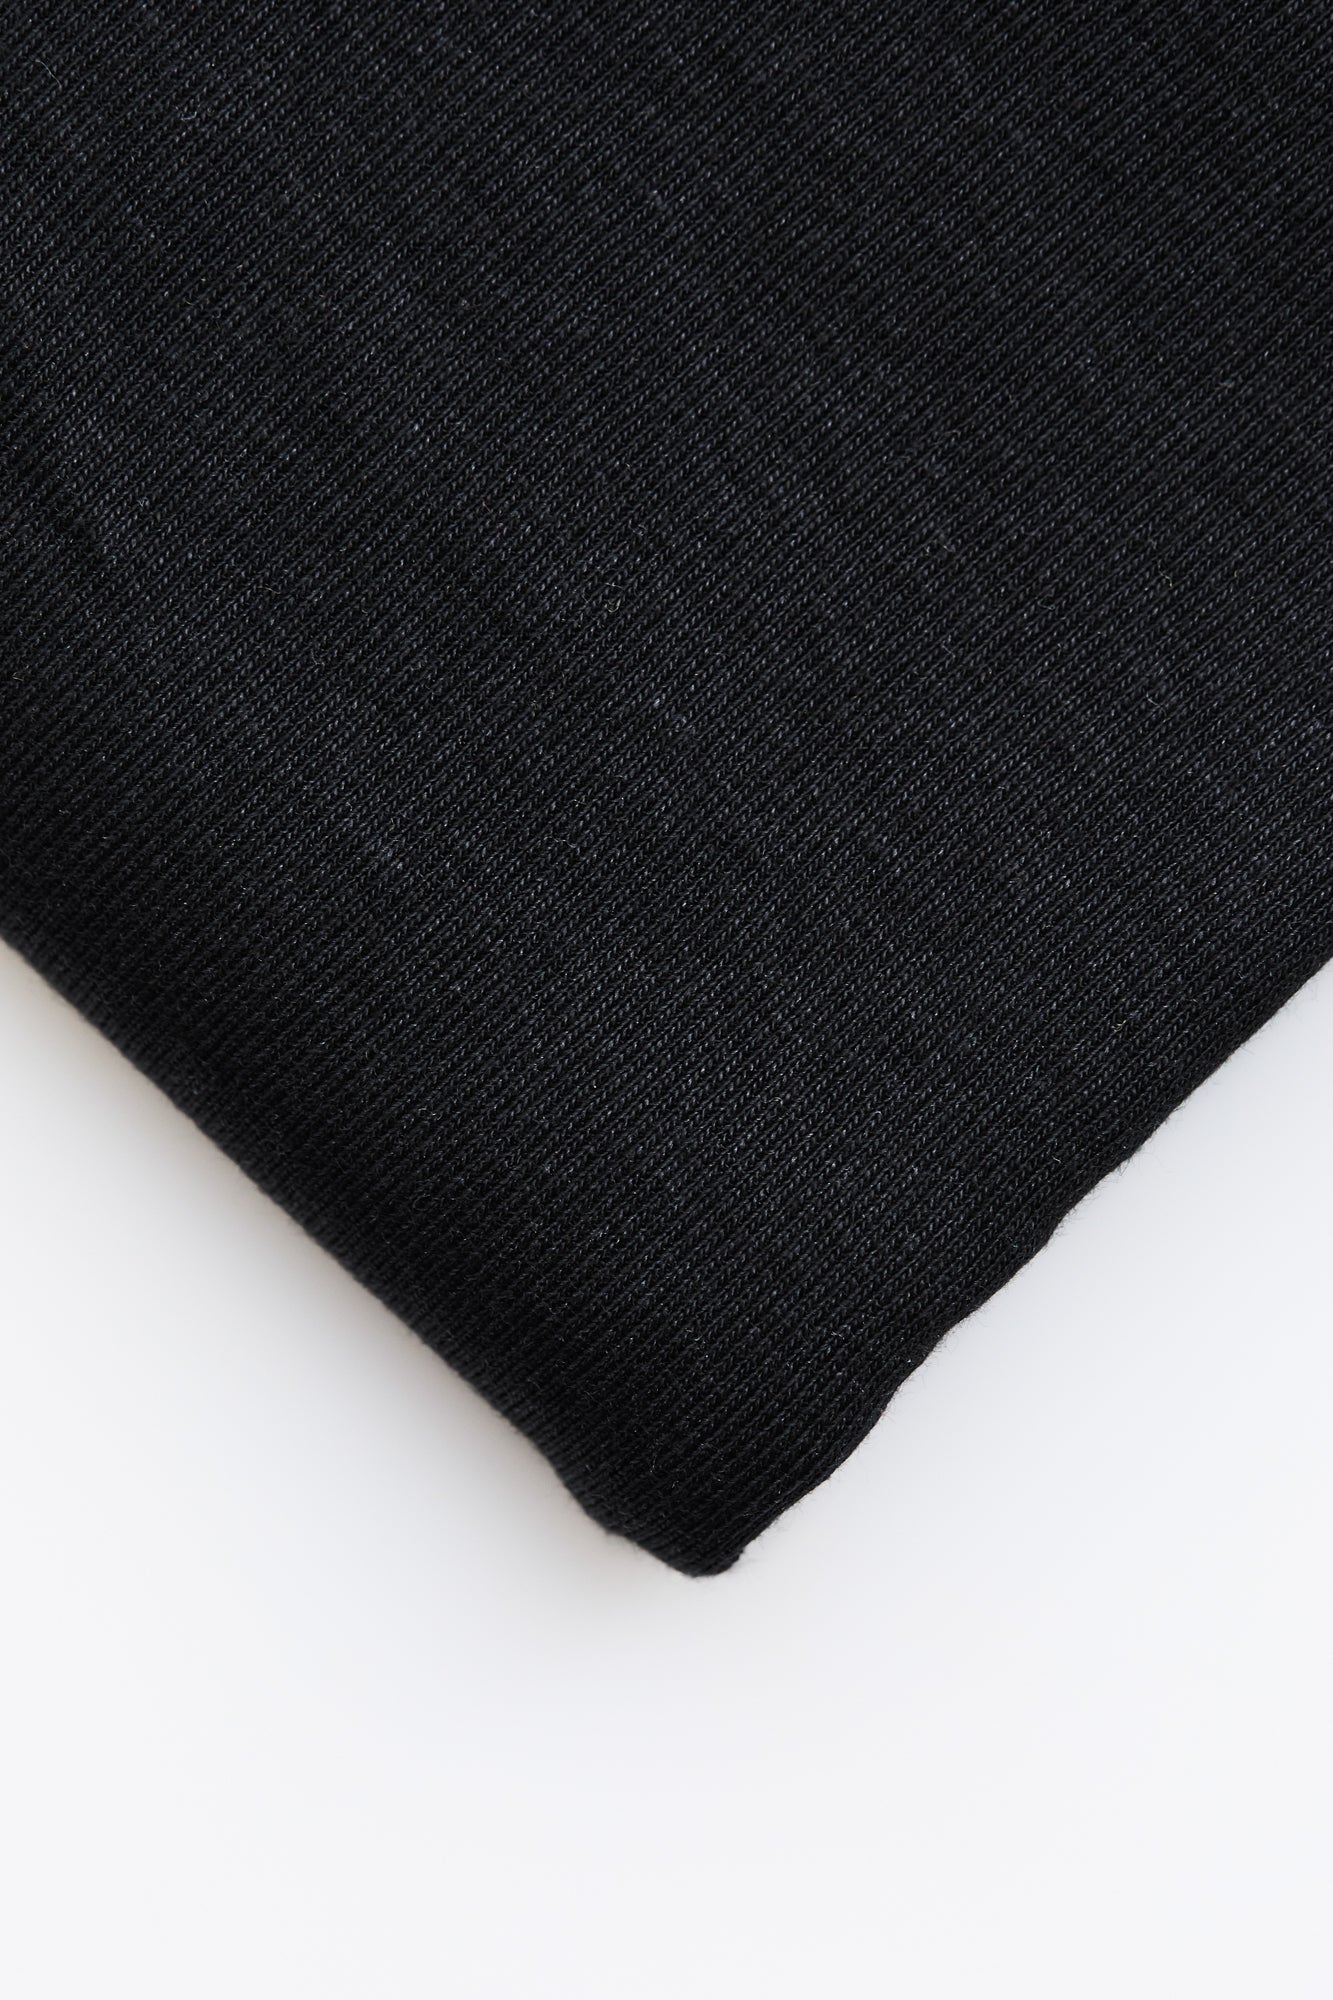 Close up of organic cotton and tencel knit sewing fabric